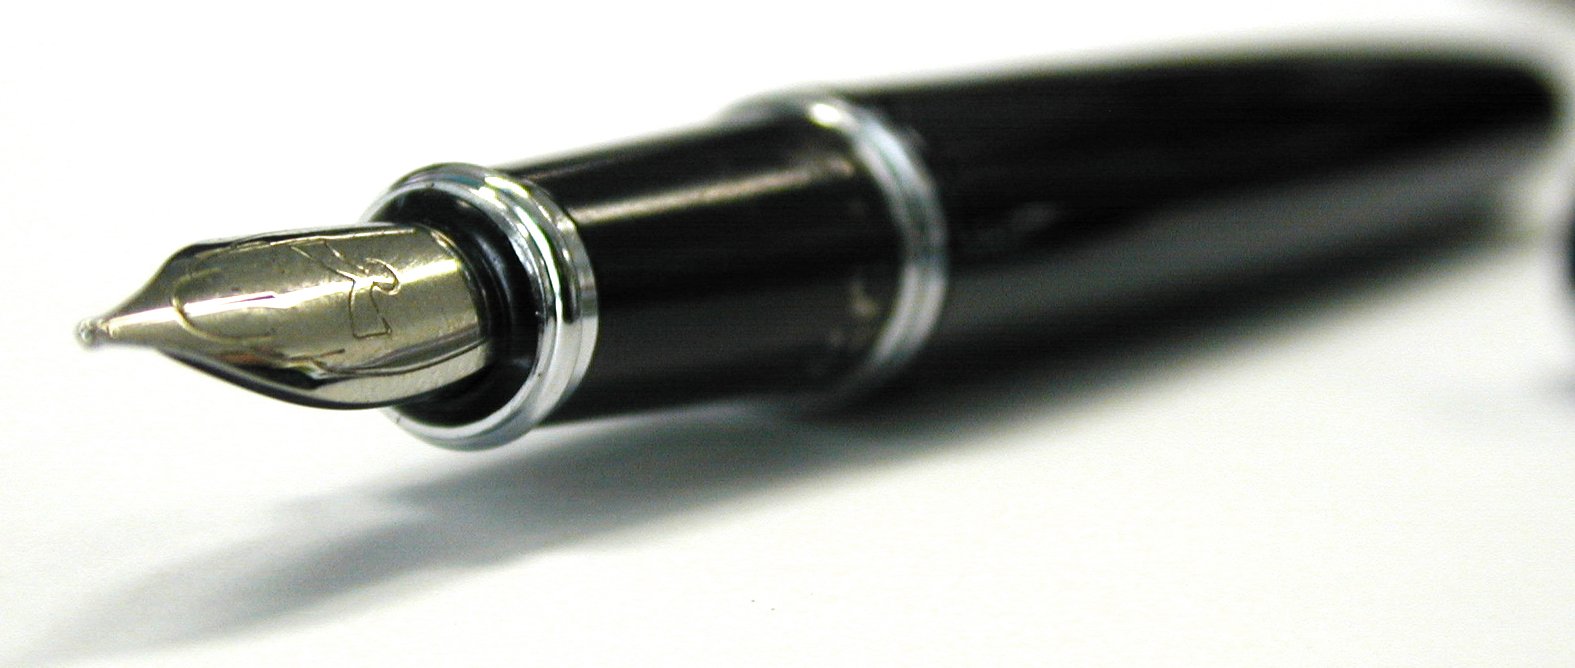 an aluminum pen on white background next to a metal object